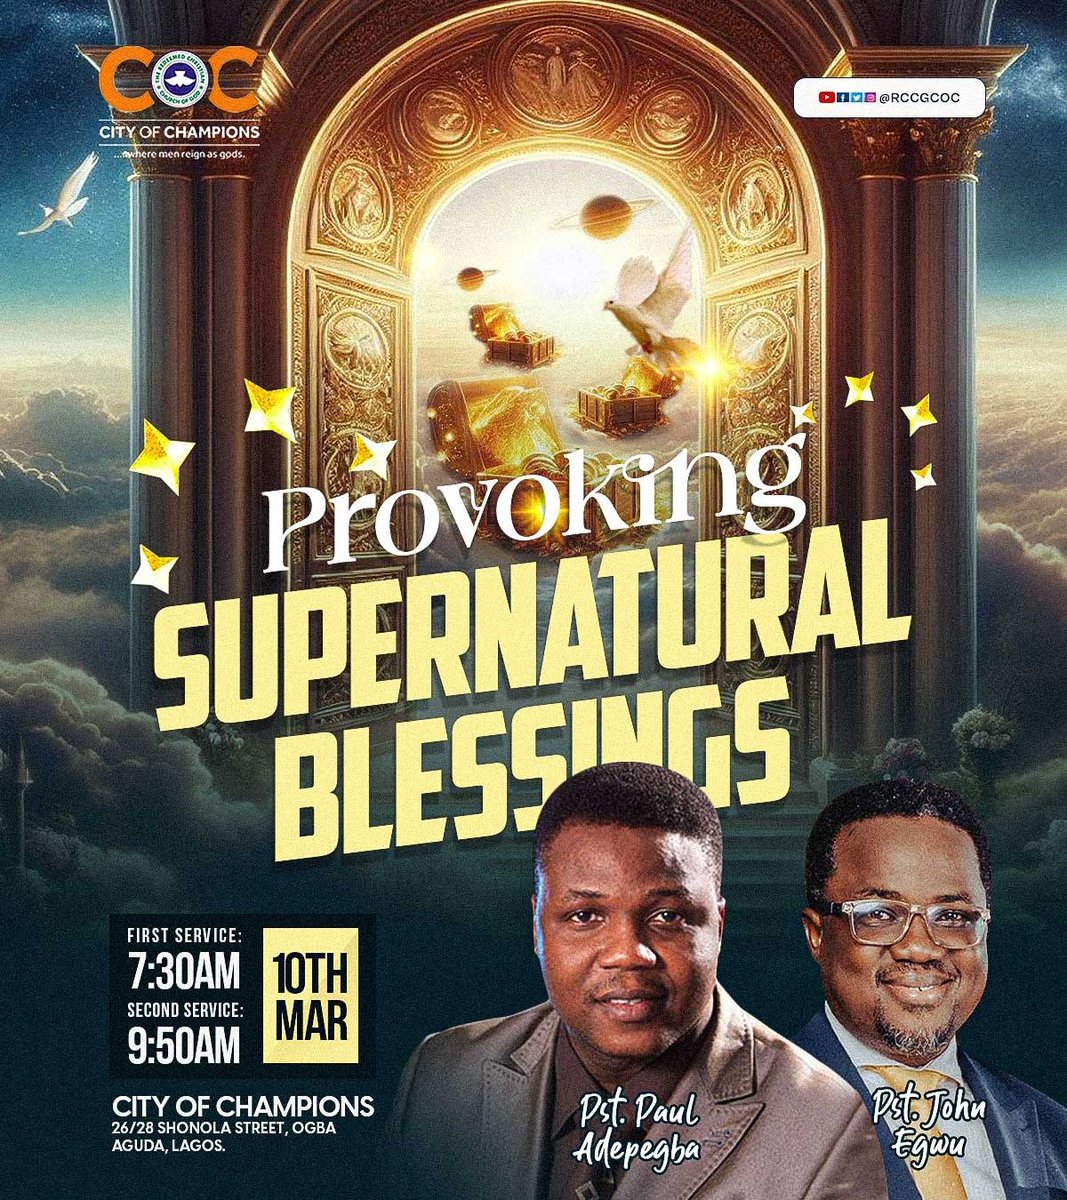 PROVOKING SUPERNATURAL BLESSINGS

Provoking Supernatural Blessings means stirring up Favour from God. 

Join us this Sunday for a truly divine experience as we delve into the heart of God’s message.

See you there!

#rccgcoc

#sundaysermon